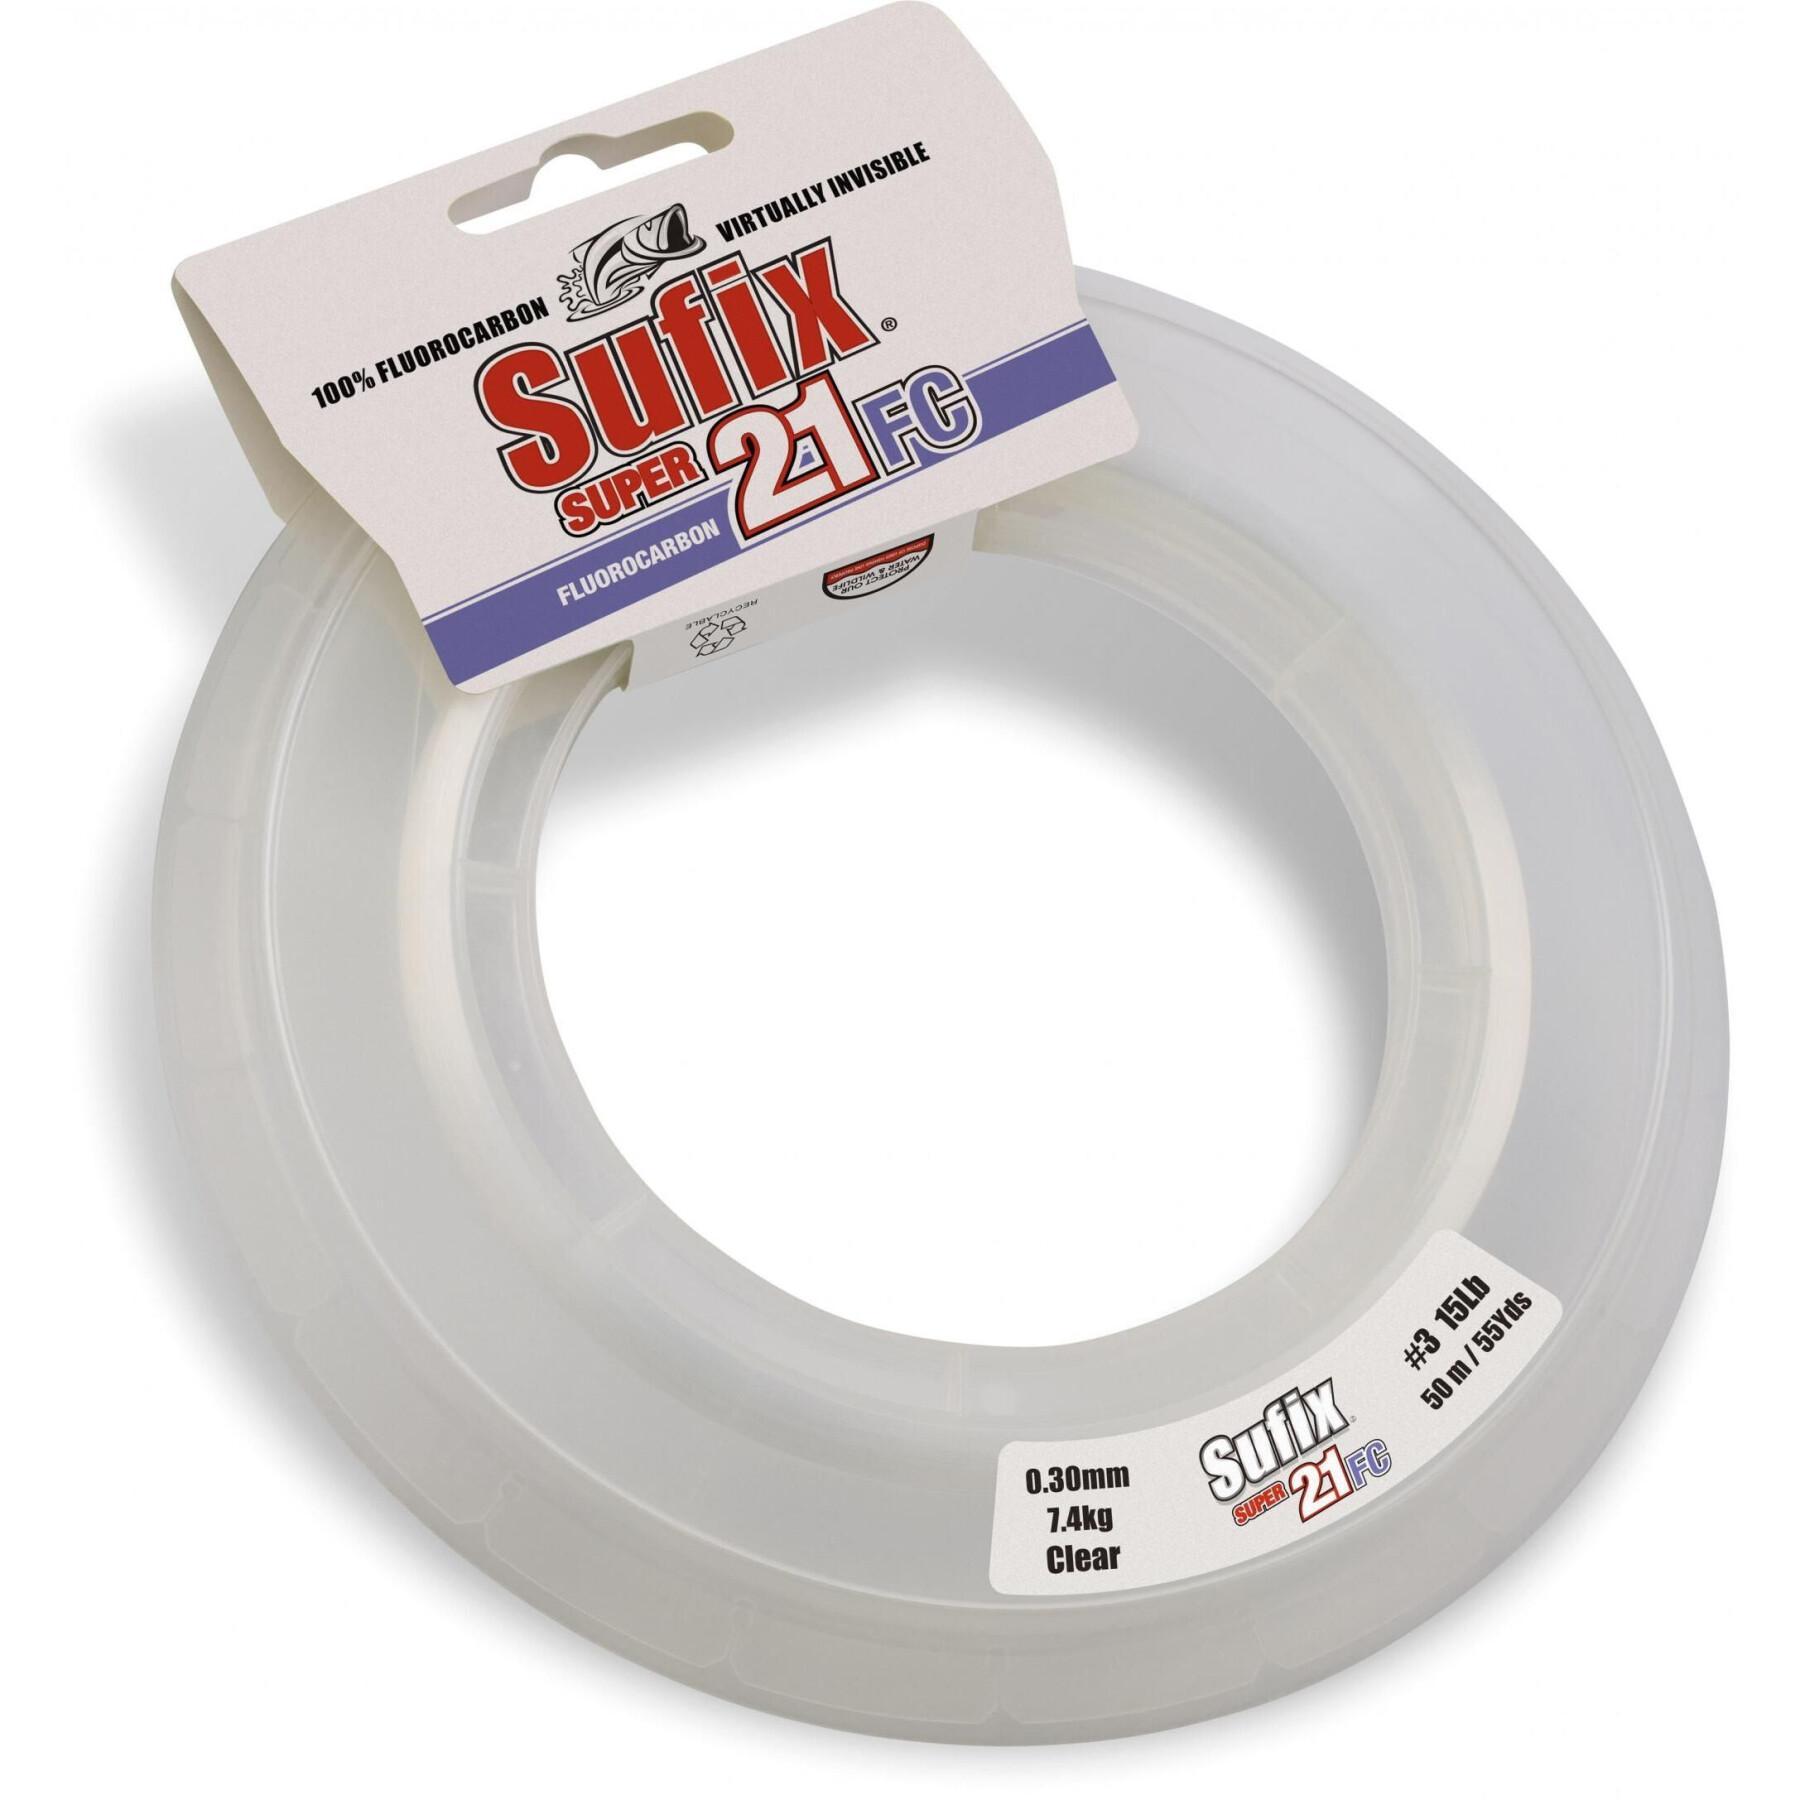 Fluorocarbon Sufix Super 21 Clear 35 - Threads and braids - Sea - Fishing